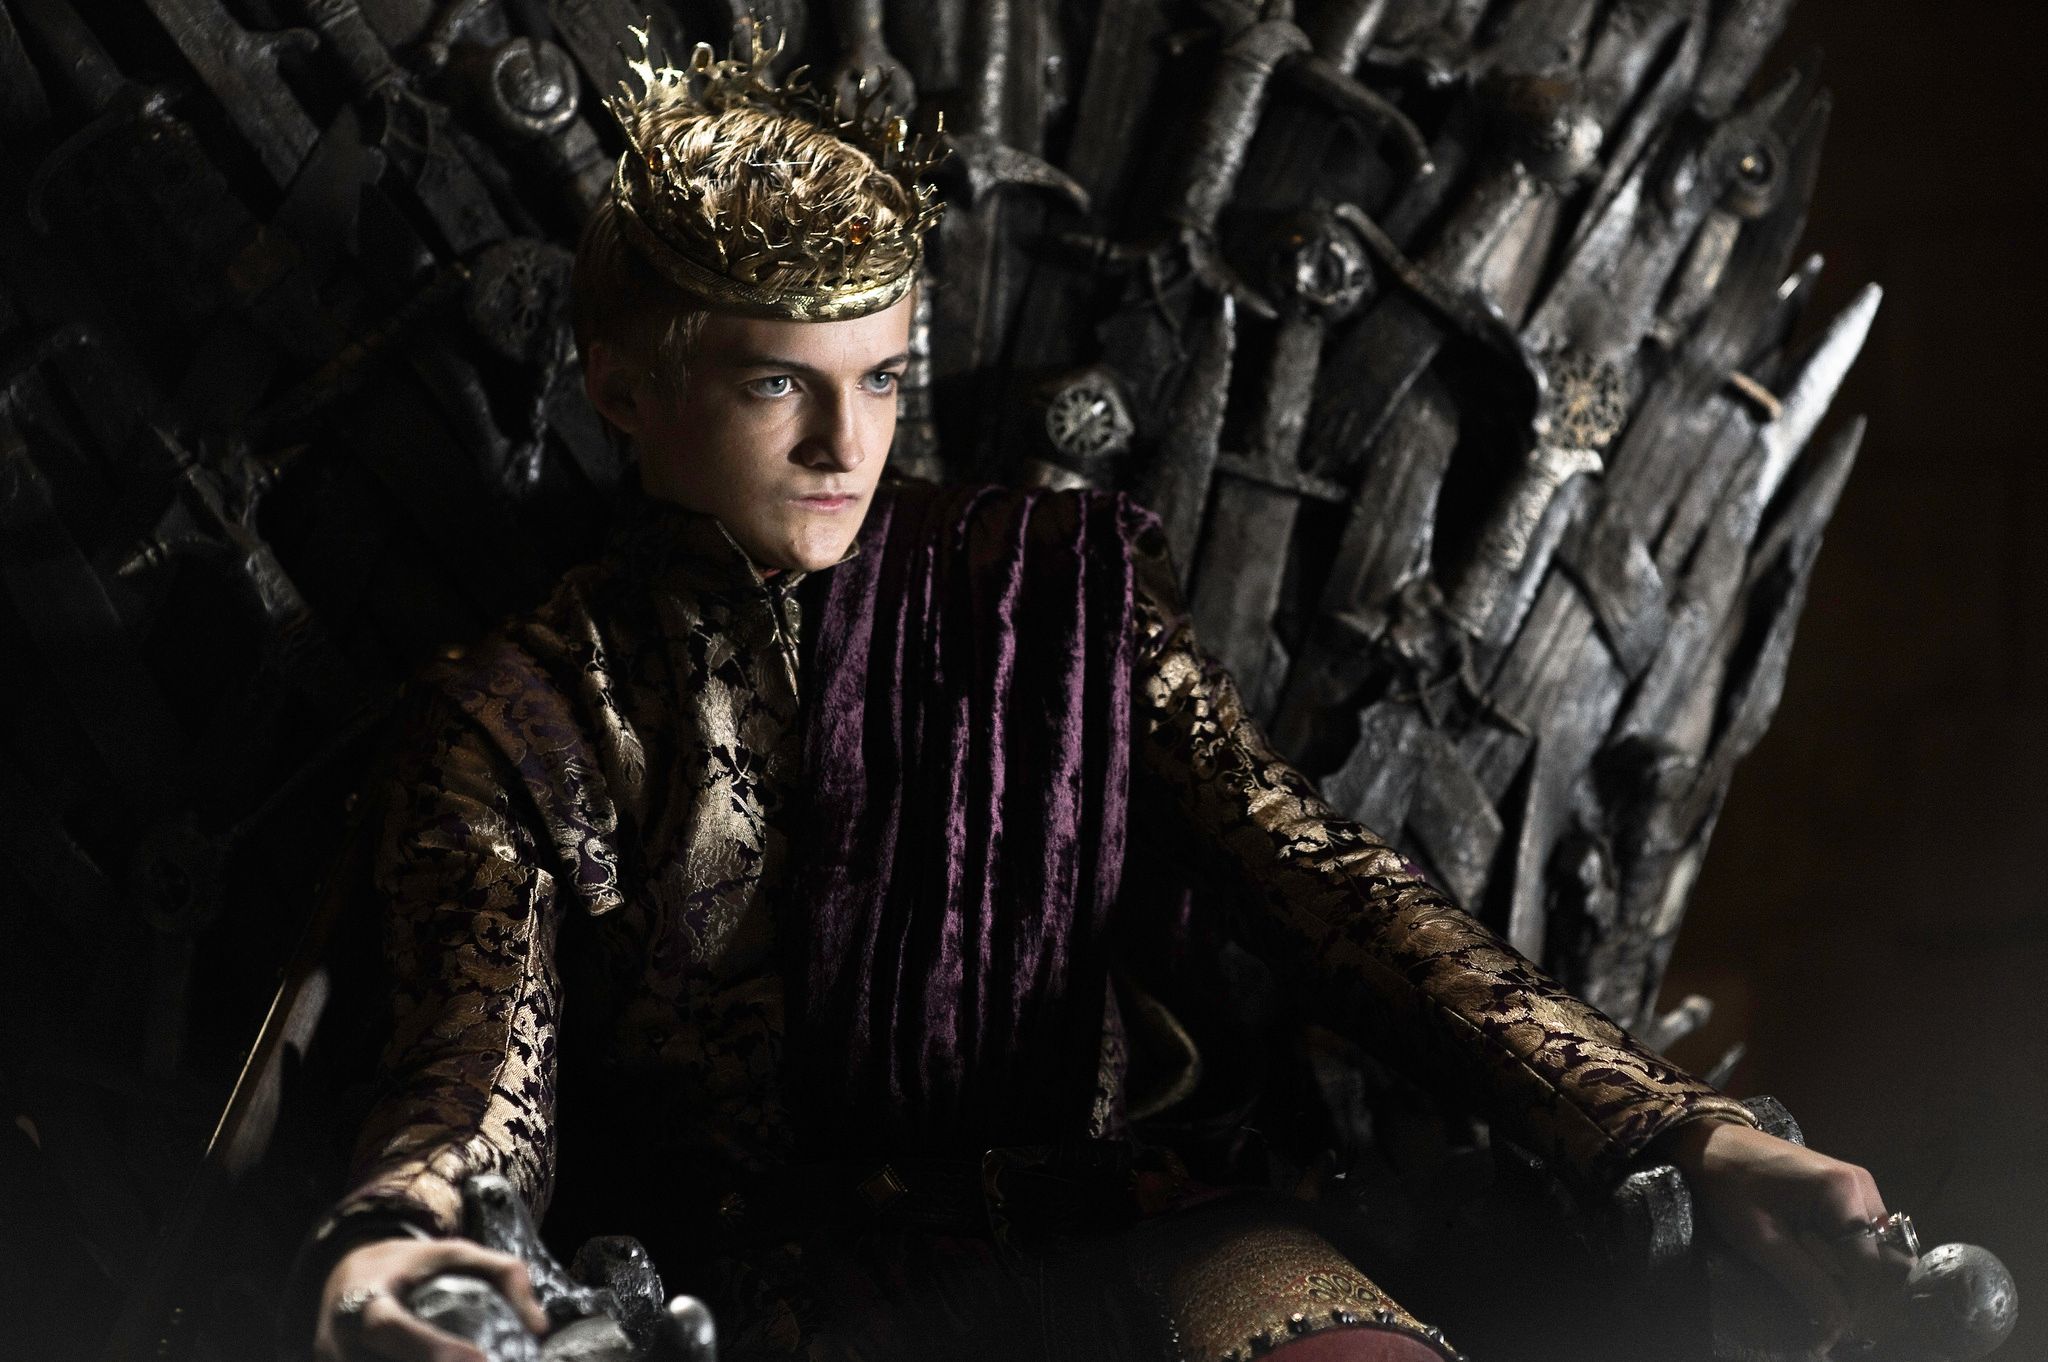 Jack Gleeson as Joffrey Baratheon in Game of ThronesOh yeah, speaking of Joffrey, the petulant young king is back and just as pissy as ever. We find him aiming a crossbow at his future wife Sansa ({4}), convinced that she had something to do with her brother Robb's victories. He has one of his goons start to beat on her, when in comes our favorite Imp Tyrion Lannister ({5}), swooping in to save the day and deliver a few cunning and hilarious lines in that perfect way he does.